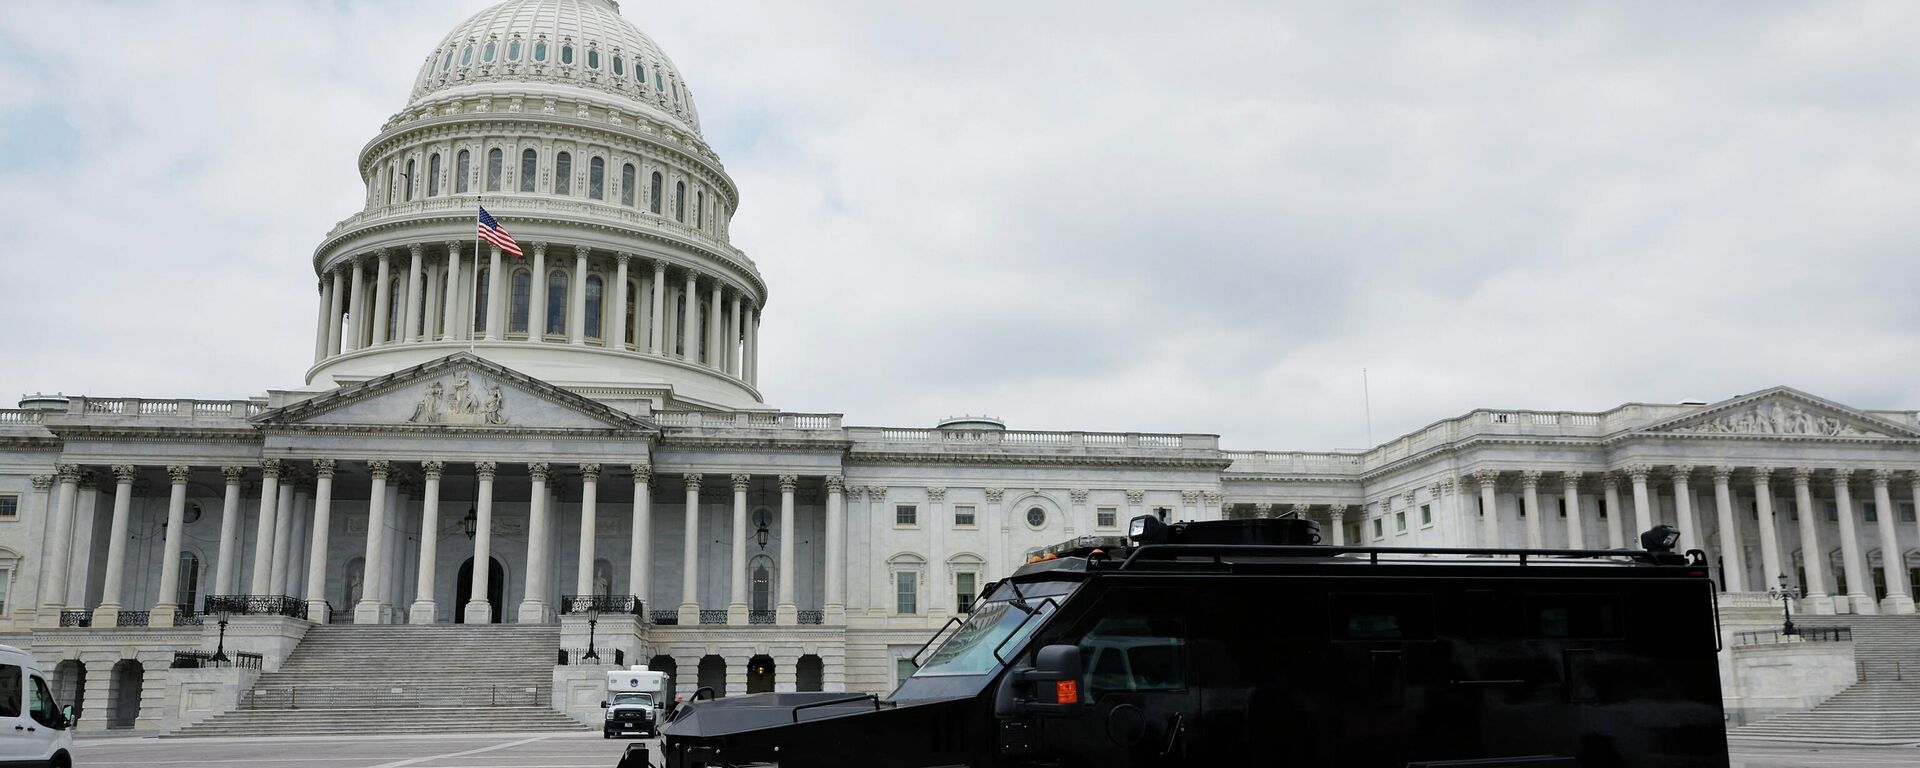 WASHINGTON, DC - JUNE 23: An armored police vehicle is positioned on the plaza between the U.S. Capitol and the Supreme Court after the court handed down its decision in Dobbs v Jackson Women's Health on June 24, 2022 in Washington, DC.  - Sputnik International, 1920, 28.06.2022